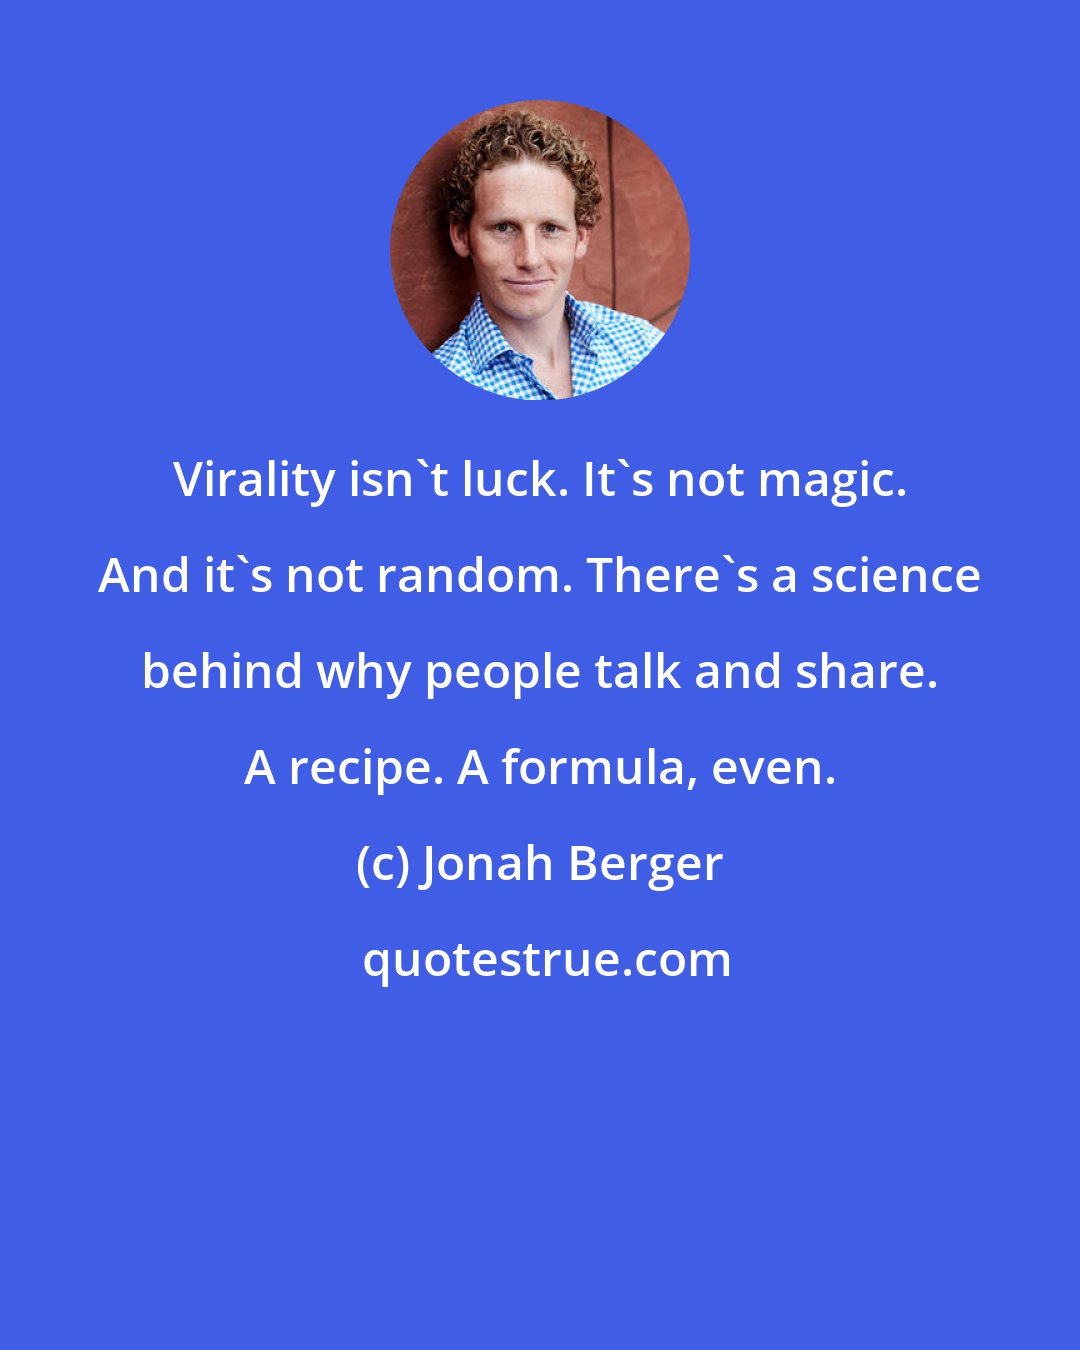 Jonah Berger: Virality isn't luck. It's not magic. And it's not random. There's a science behind why people talk and share. A recipe. A formula, even.